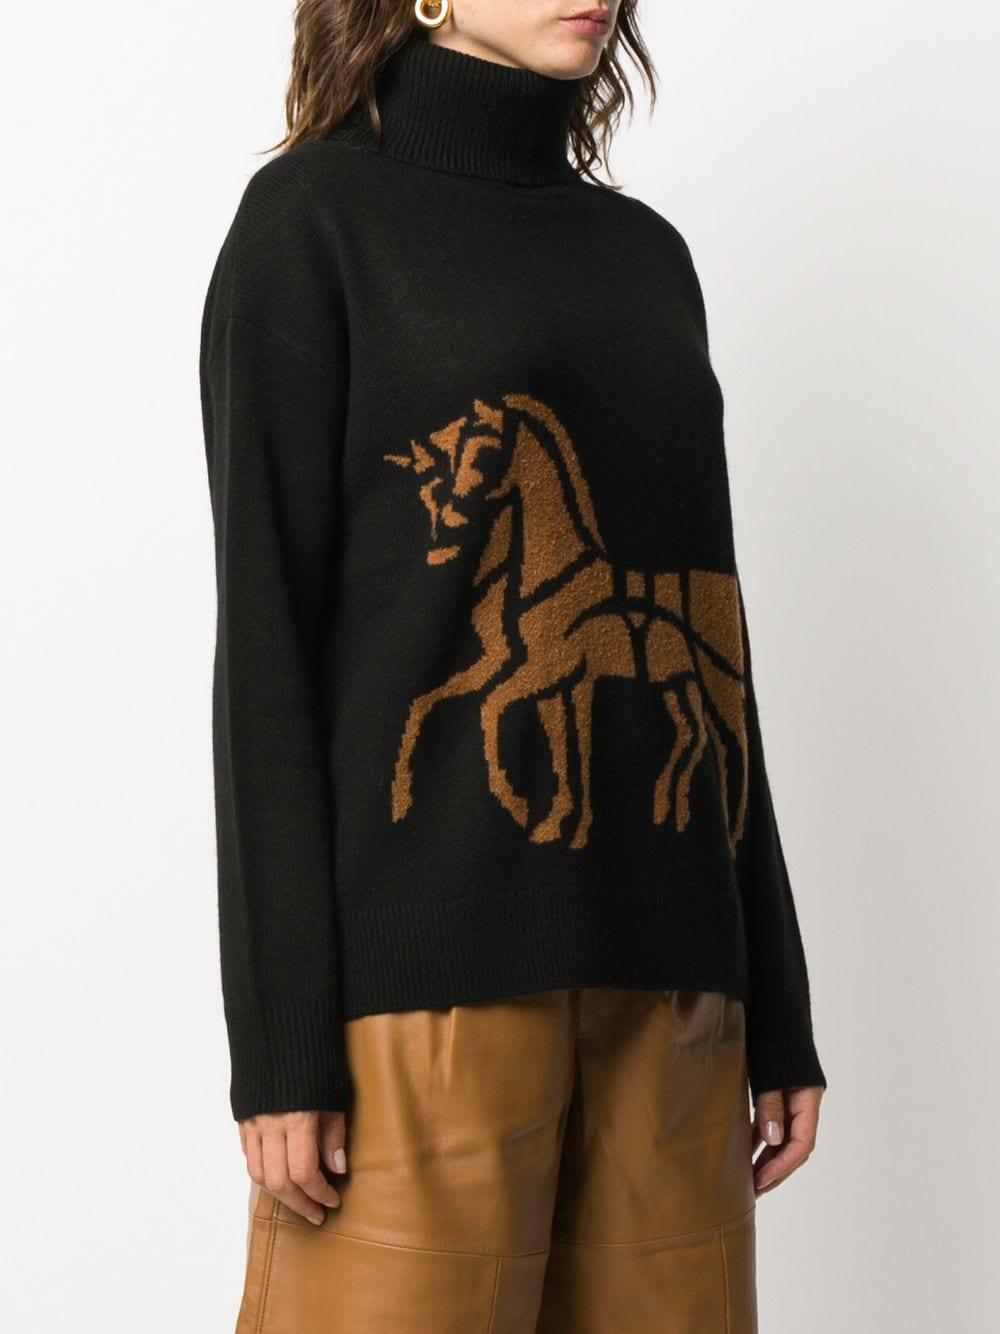 COACH Cashmere Horse And Carriage Jumper in Black - Lyst